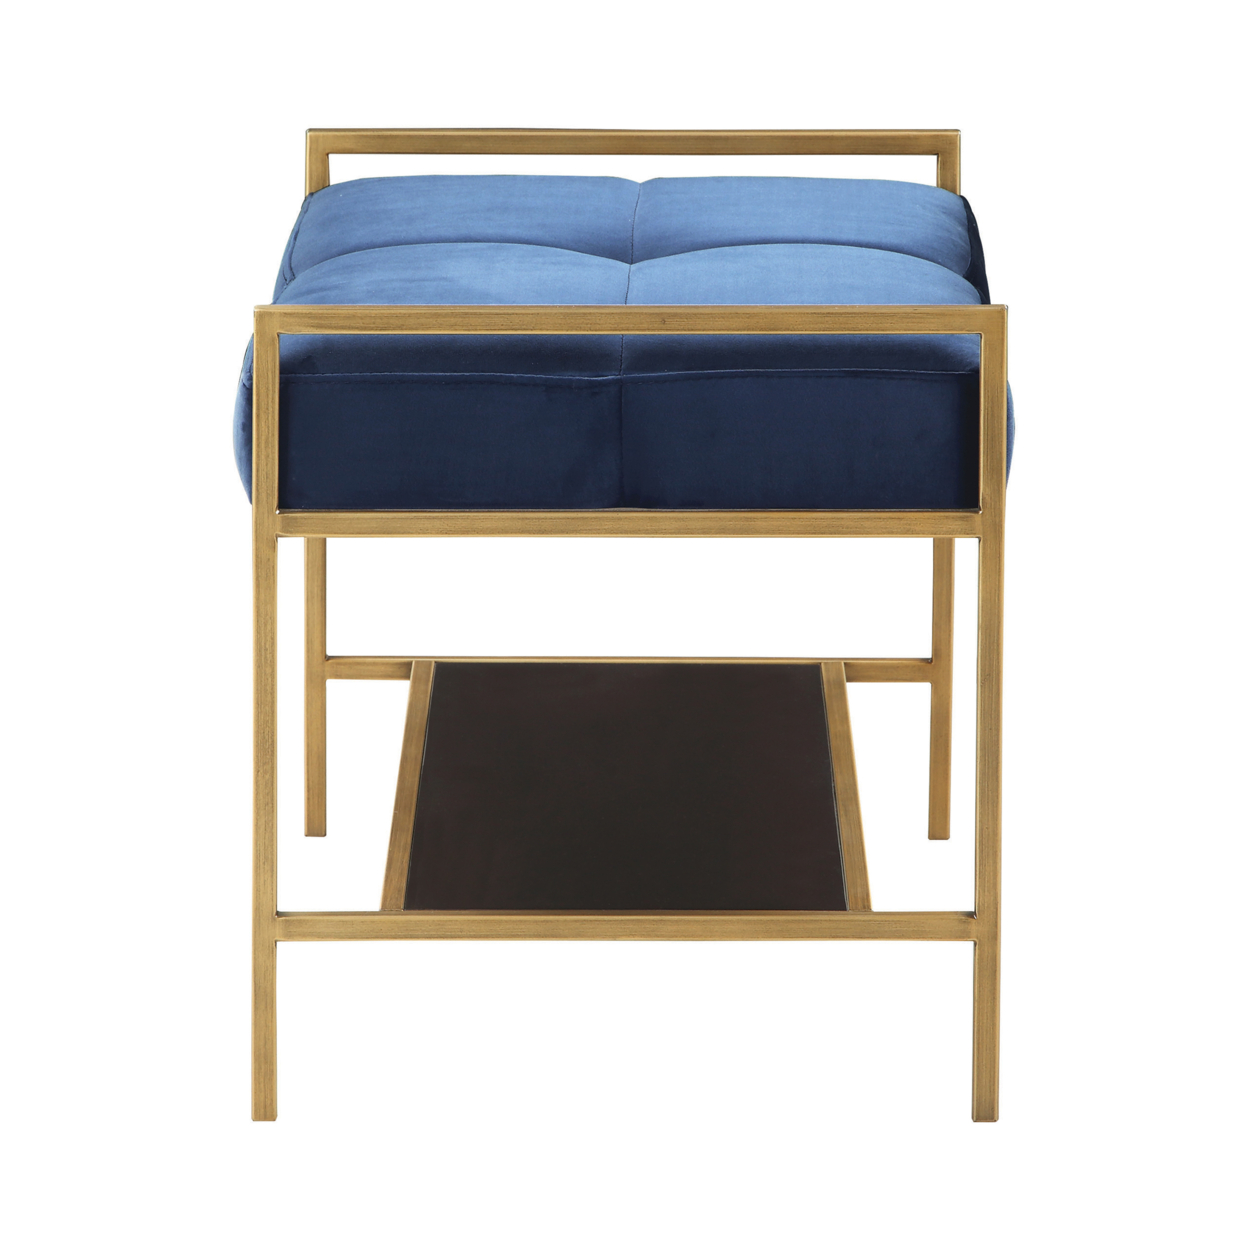 Metal Bench With Fabric Upholstered Plump Seats, Gold And Blue- Saltoro Sherpi